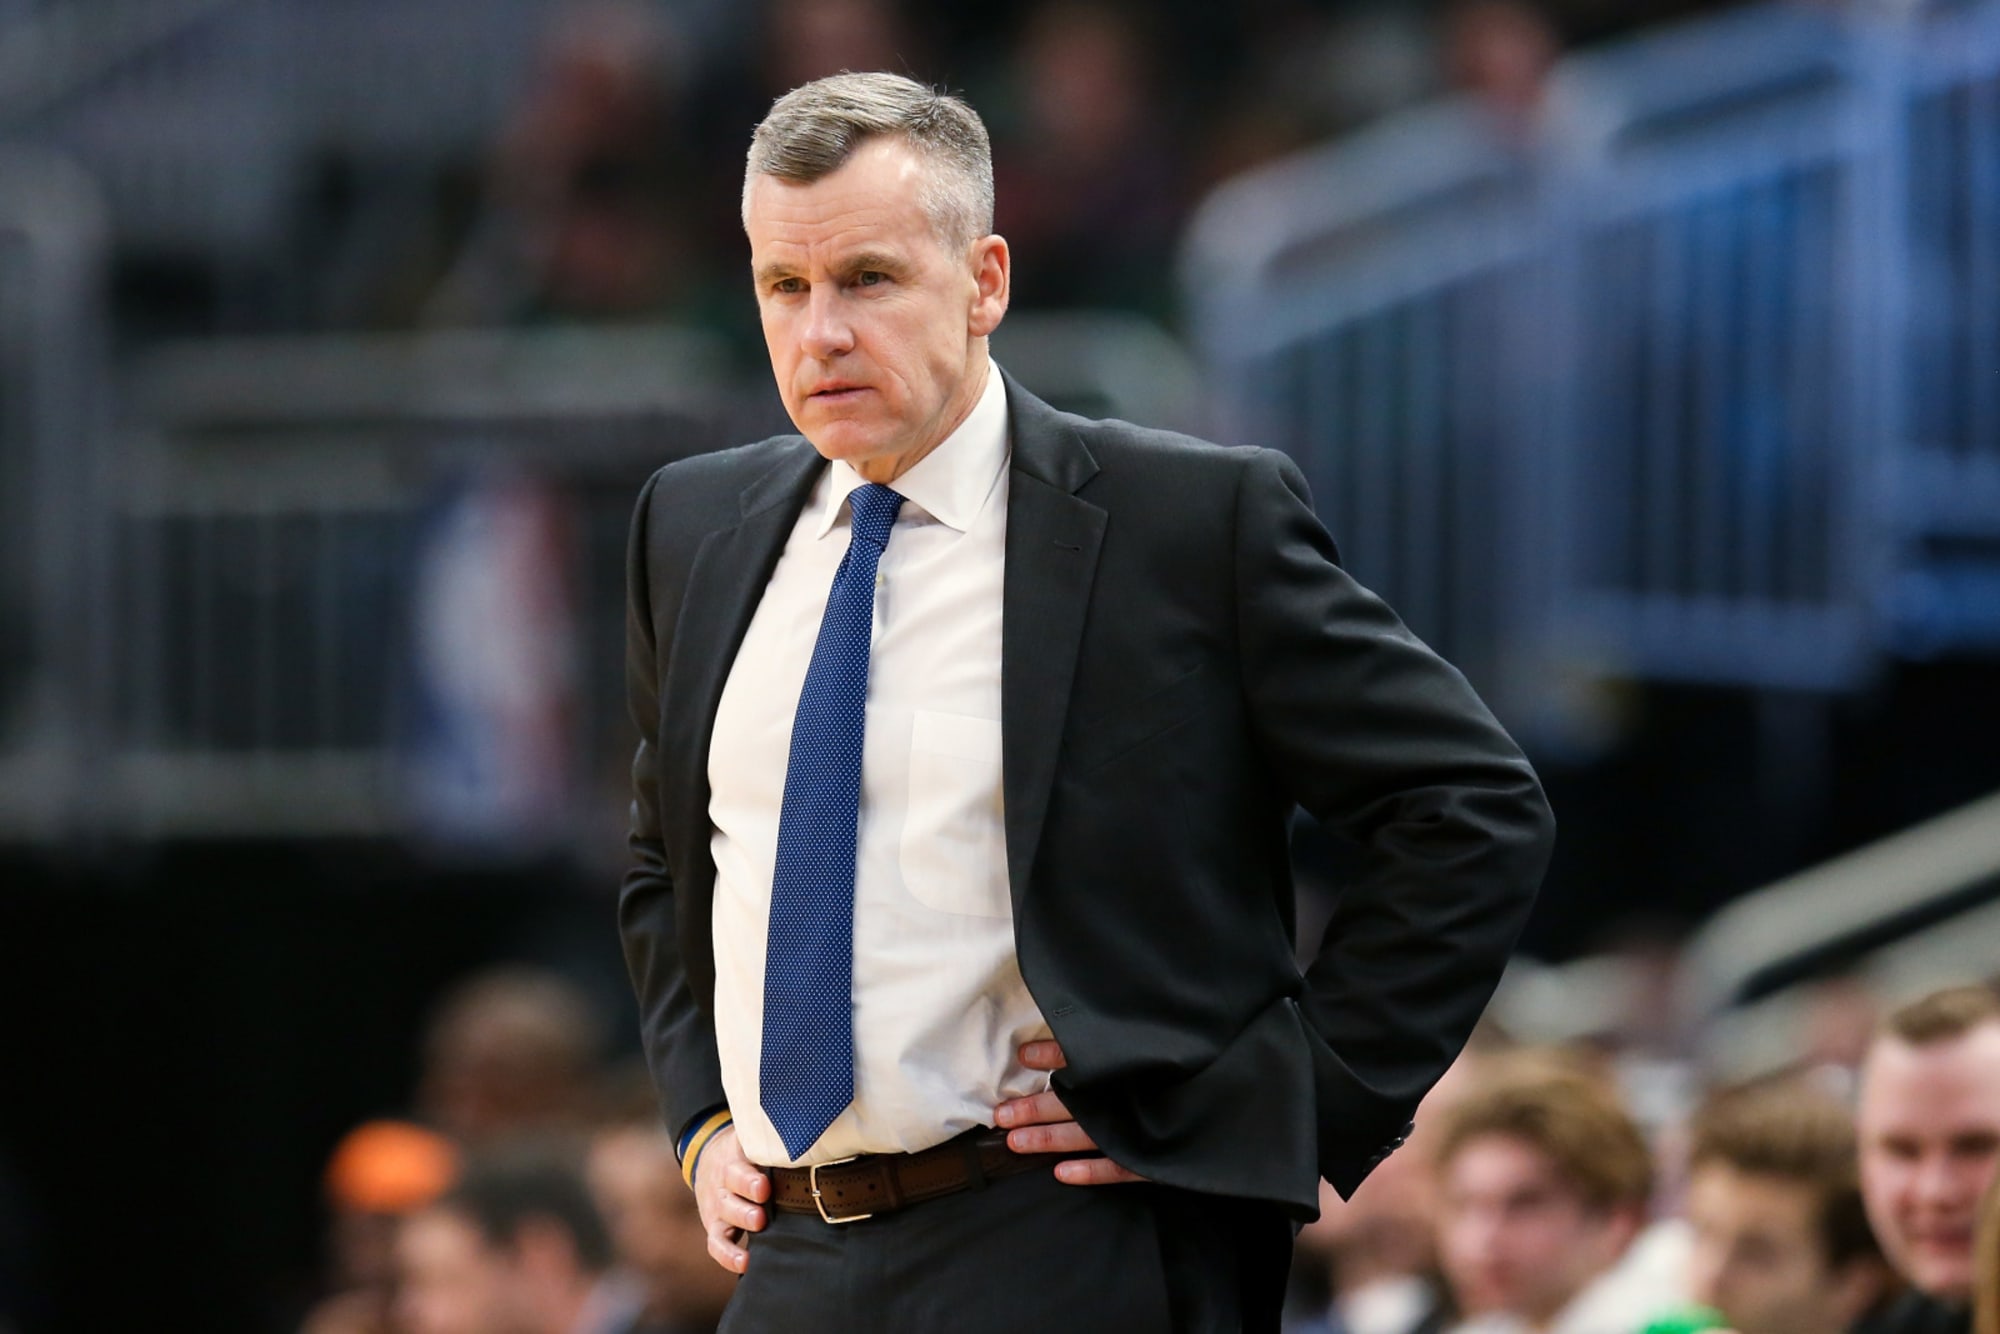 New Bulls head coach Billy Donovan brings experience and